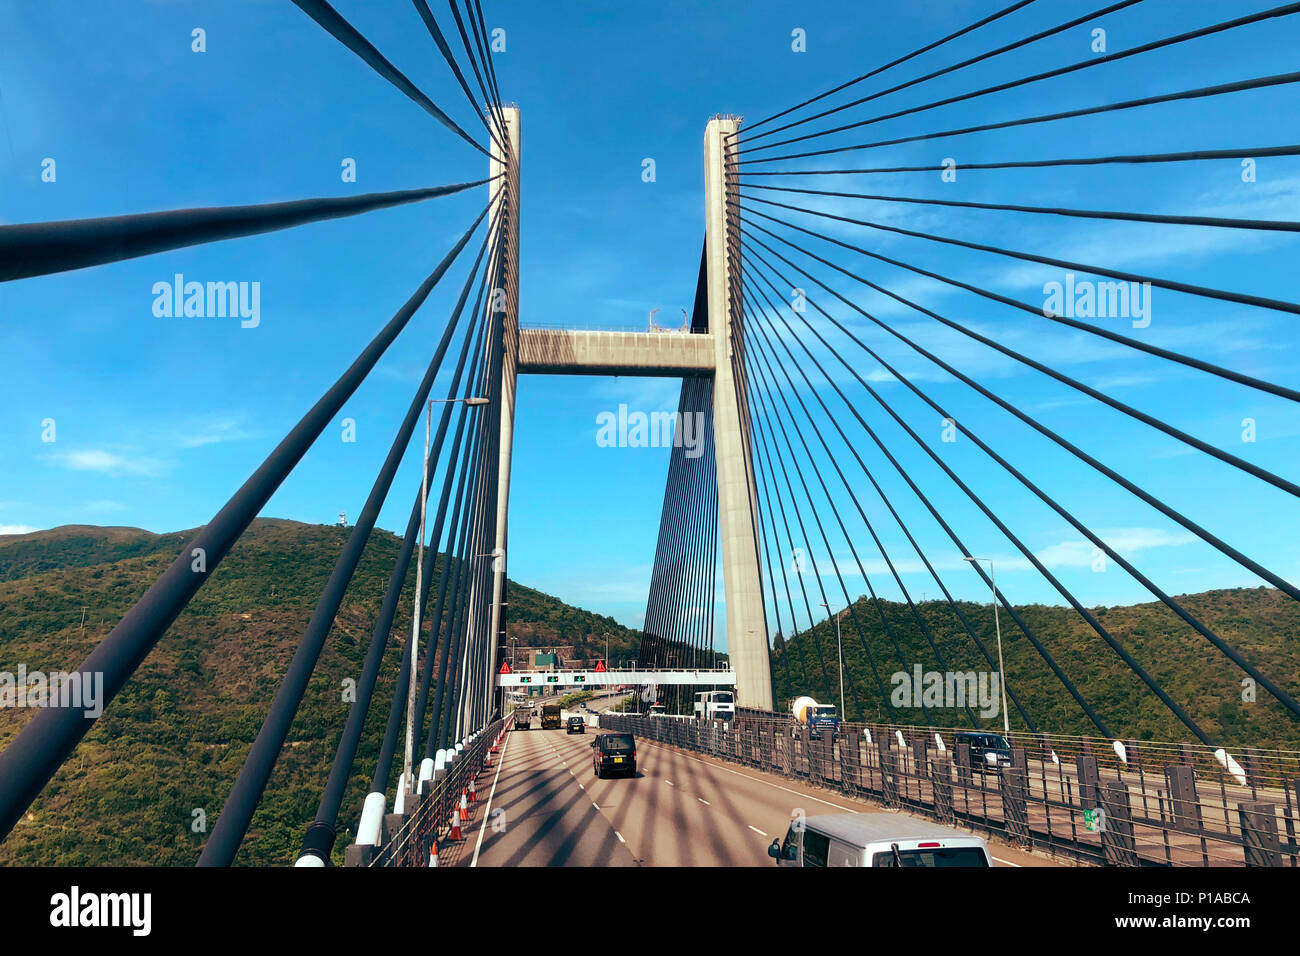 Hong Kong. Tsing Ma Bridge is one of longest span suspension bridges in the world which links Hong Kong New Territories and Lantau Island. Stock Photo